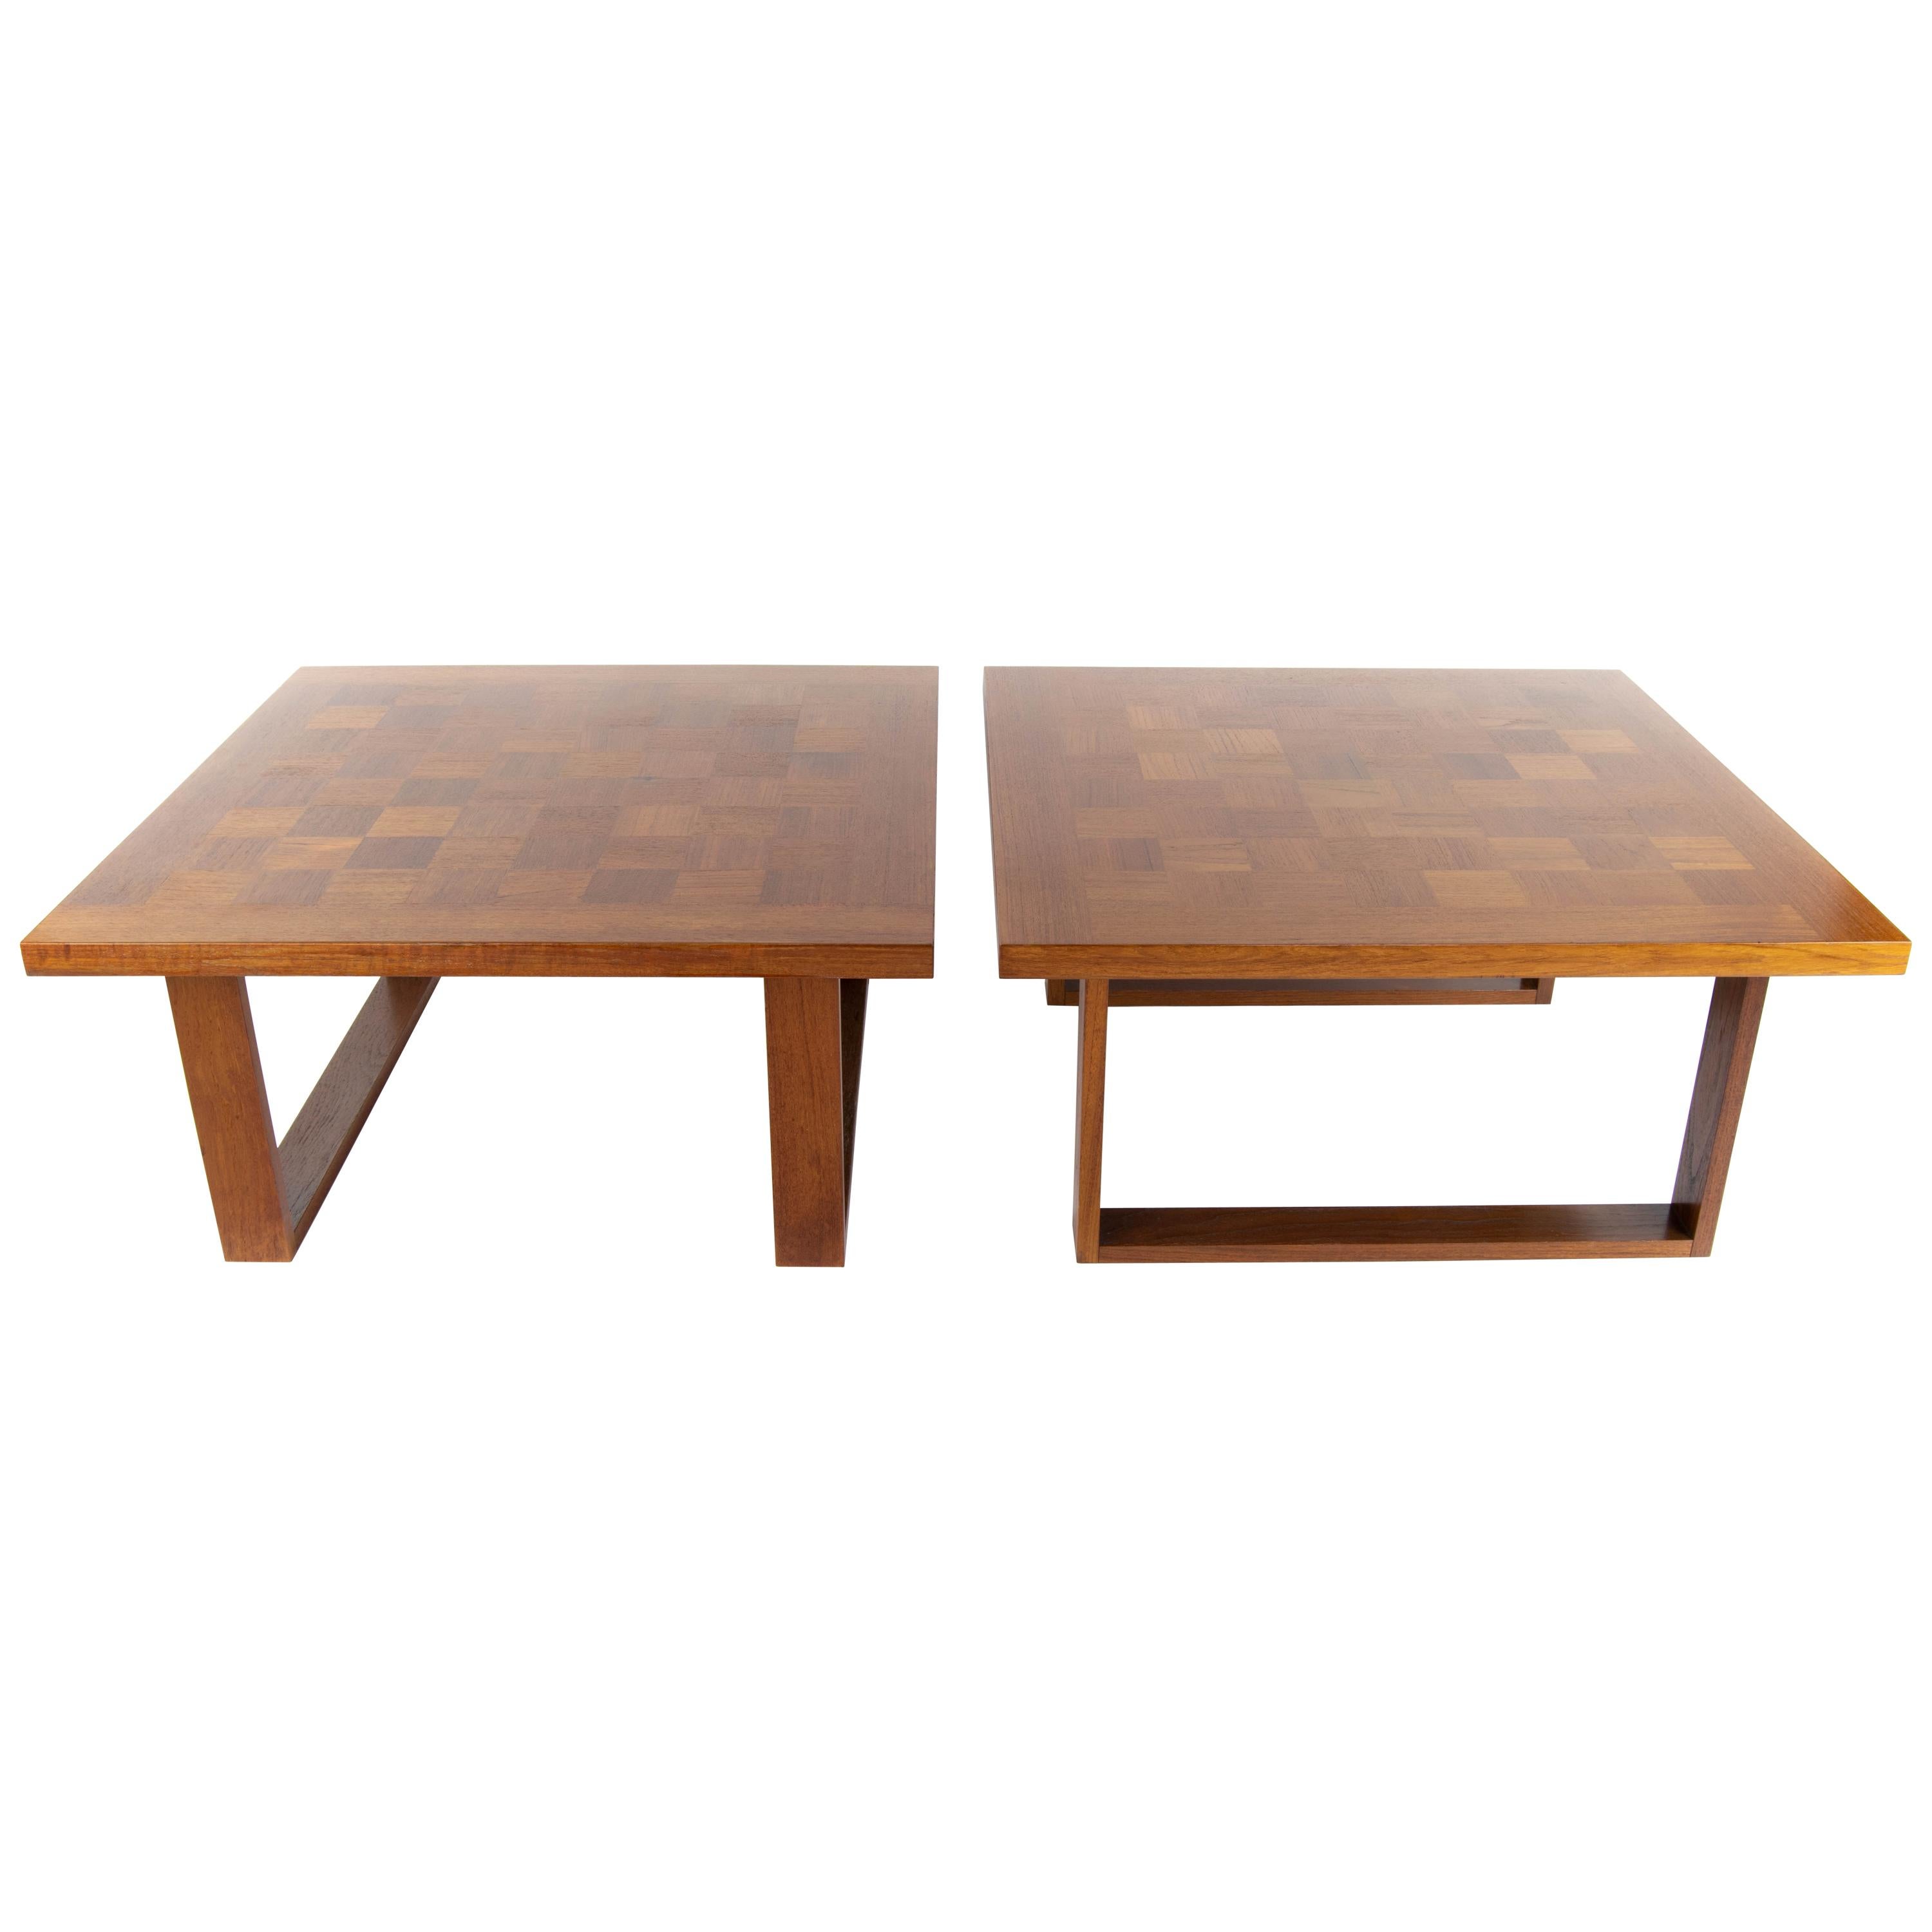 Pair of "Boogie Woogie" Coffe Tables in Teak by Poul Cadovius for Cado, Denmark